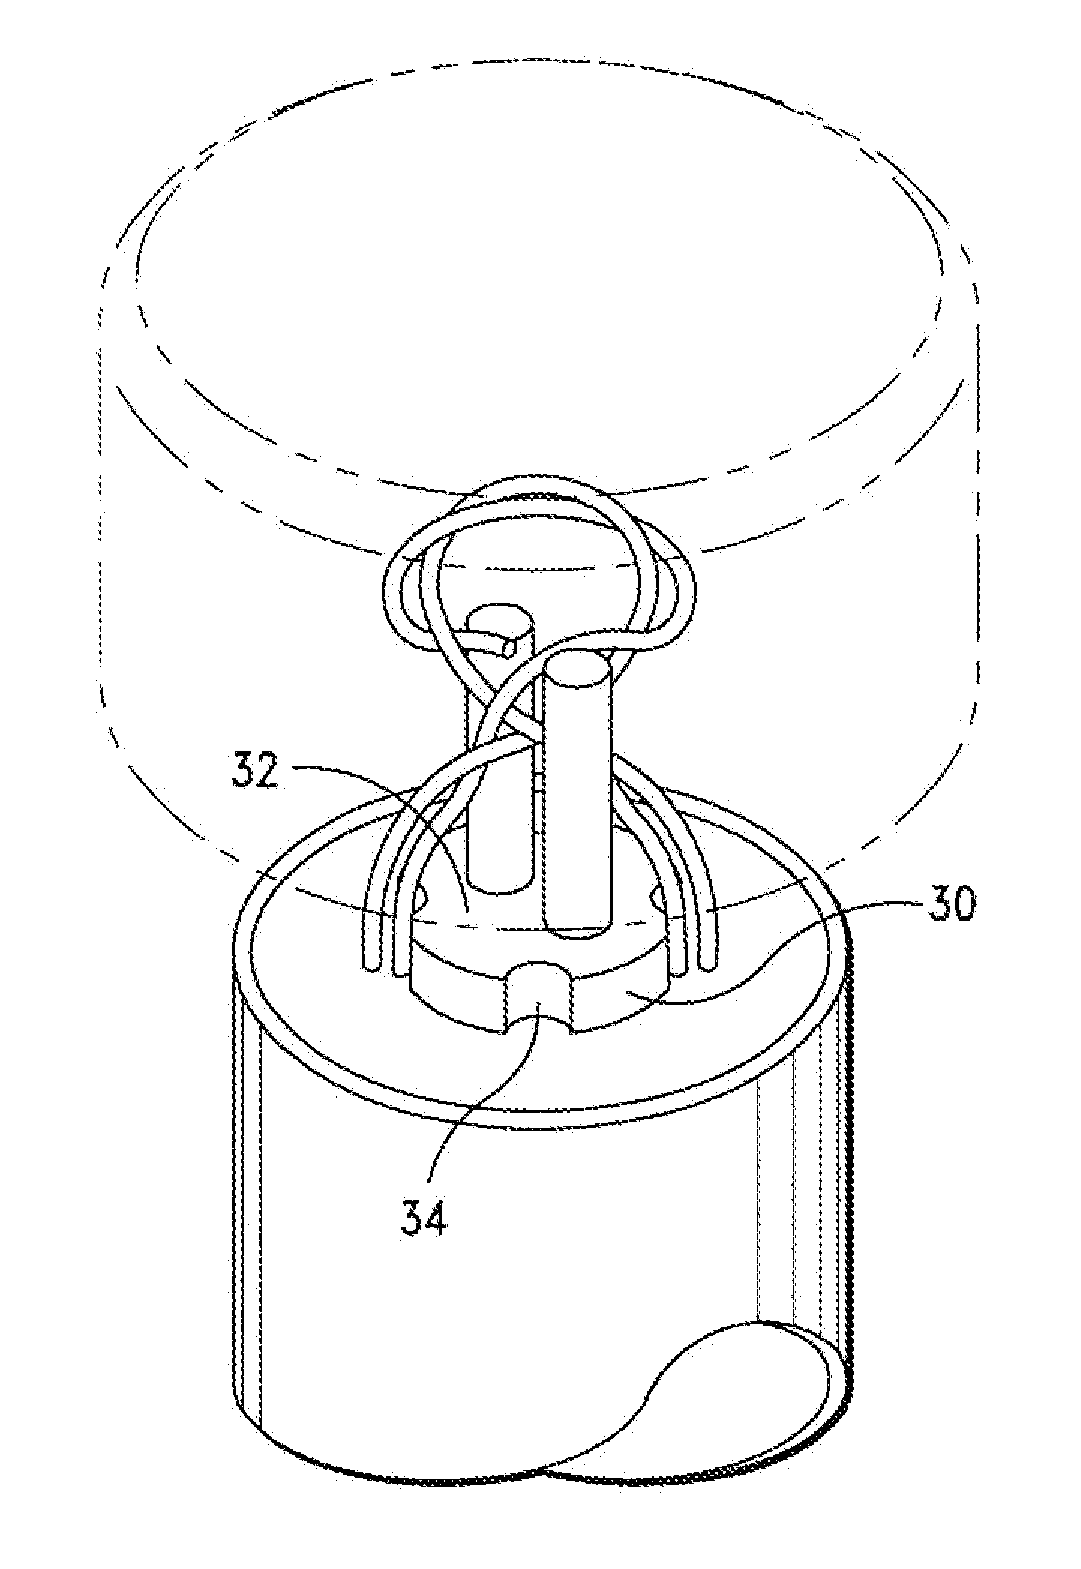 Electrically conductive buoyant cable